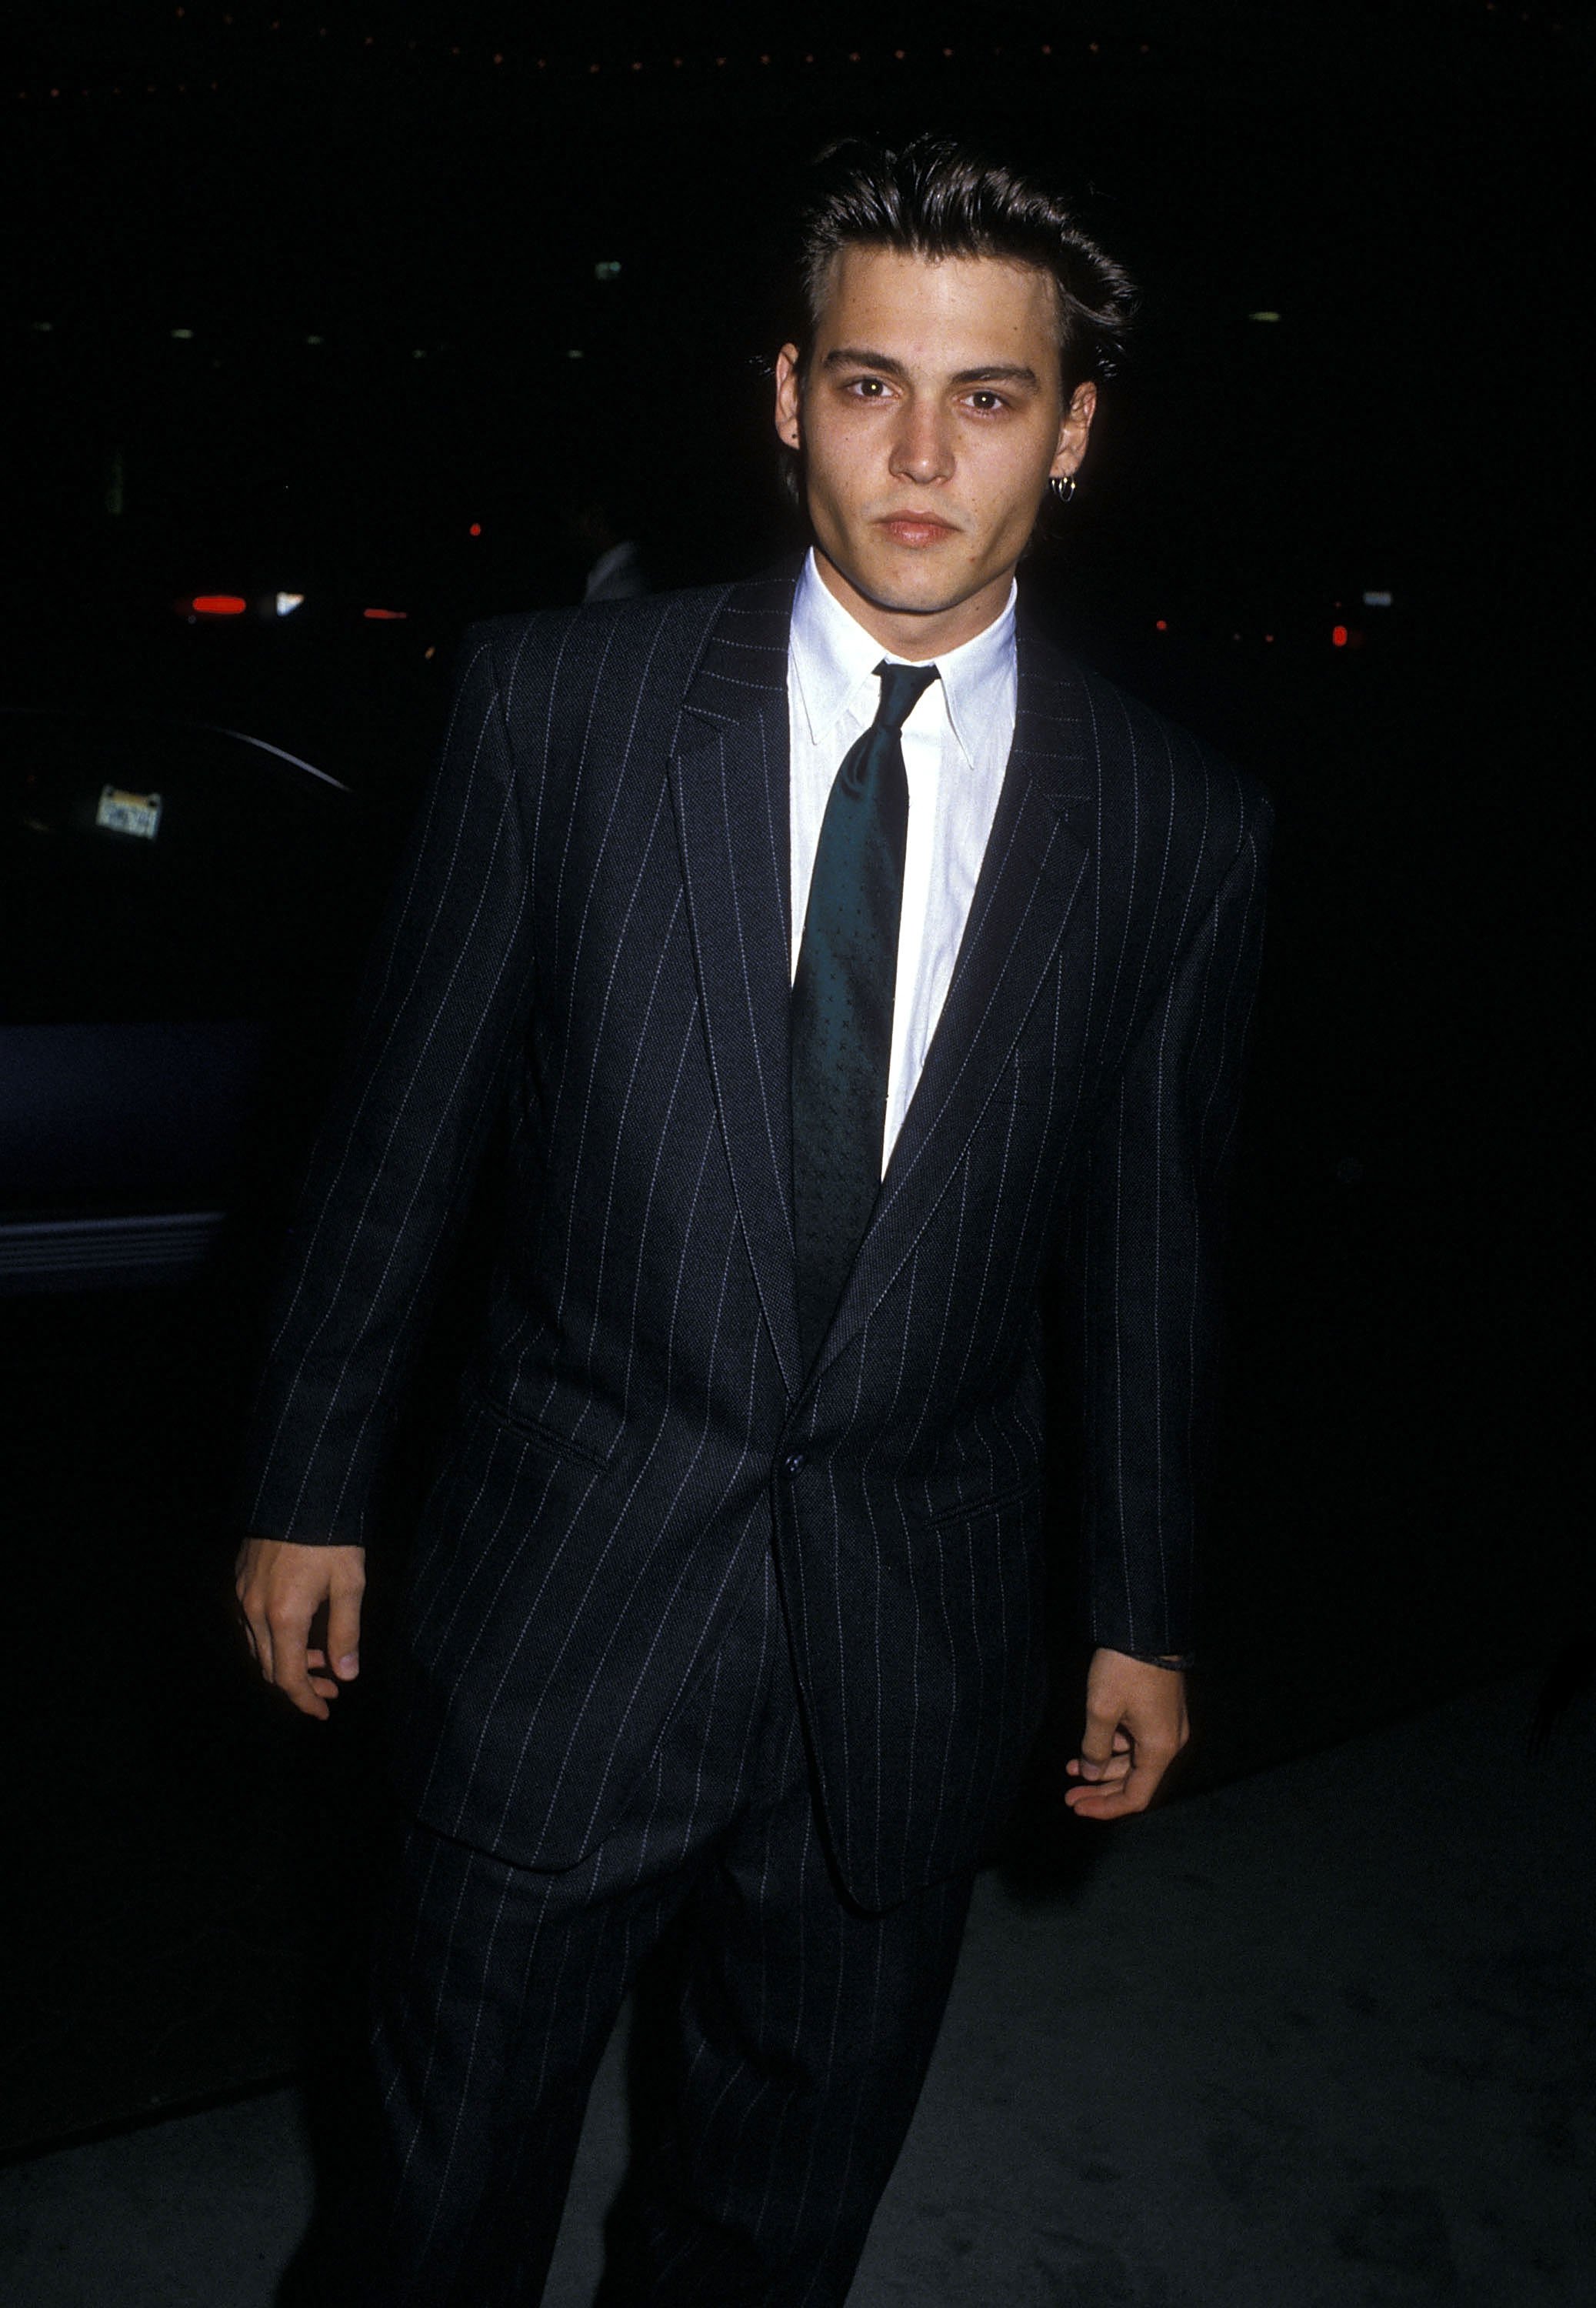 Actor Johnny Depp attends the 18th Annual US Golden Eagle Awards on May 13, 1988 at Beverly Hilton Hotel in Beverly Hills, California | Source: Getty Images